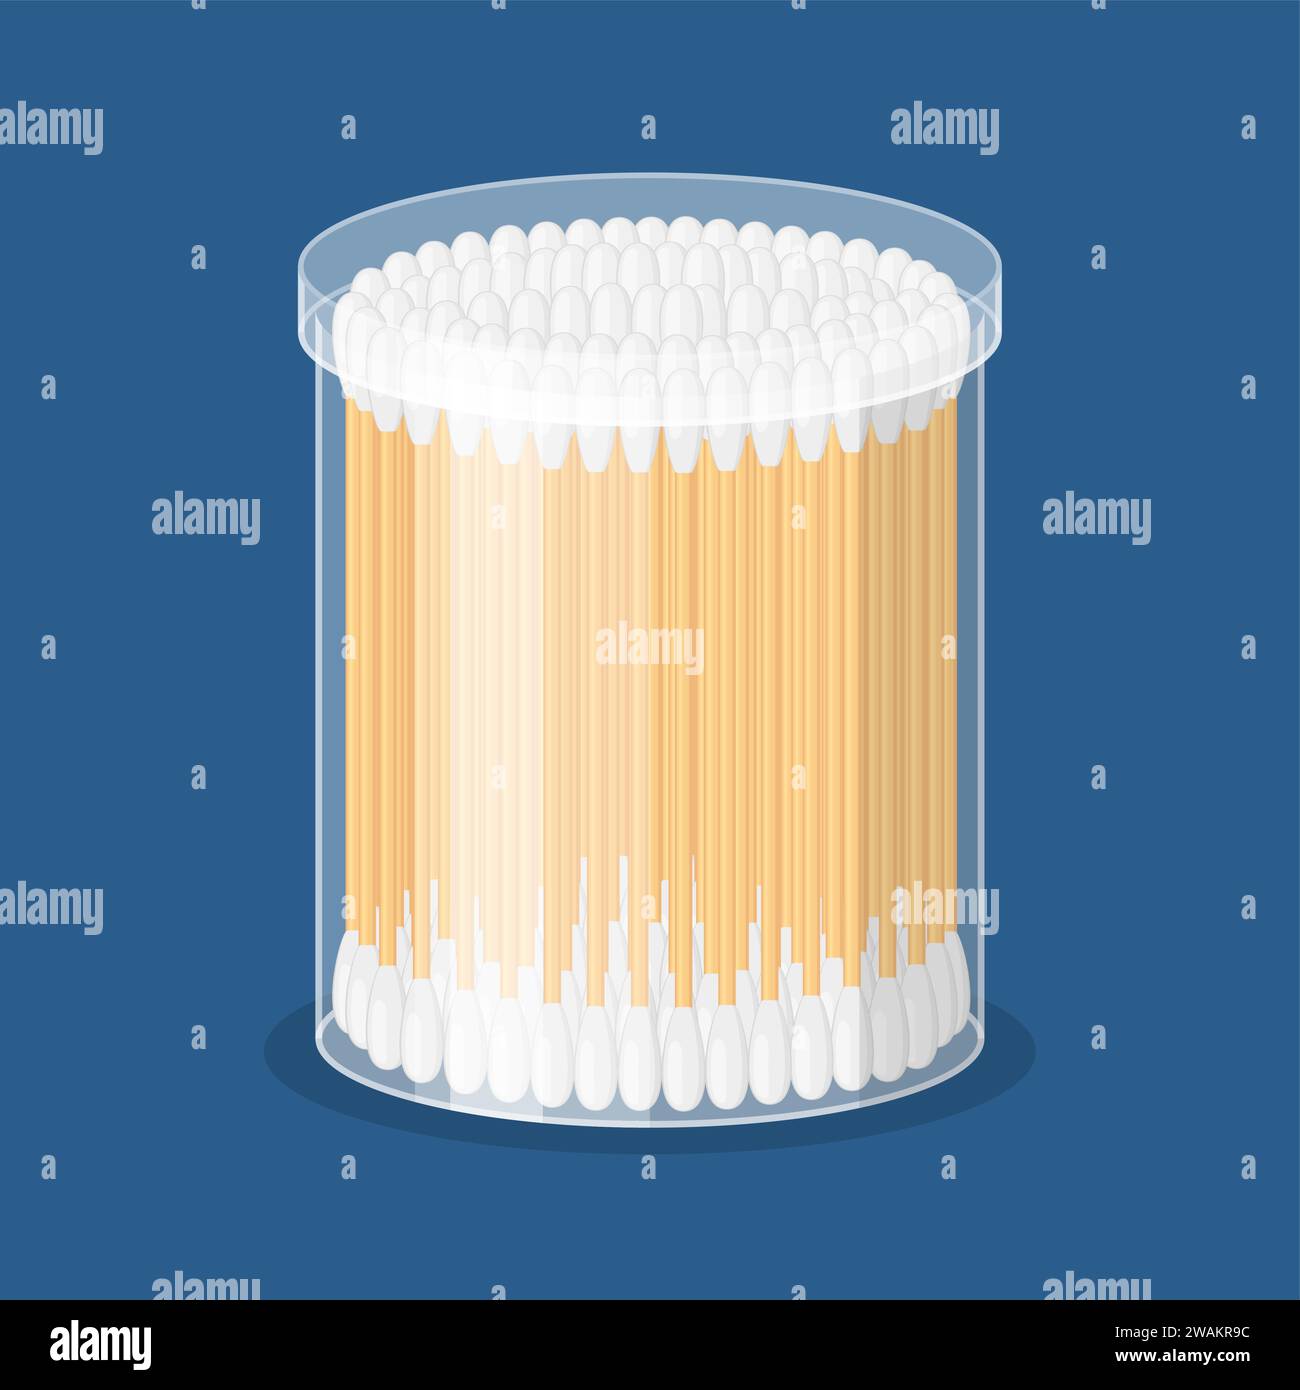 4,033 Absorbent Cotton Roll Images, Stock Photos, 3D objects, & Vectors